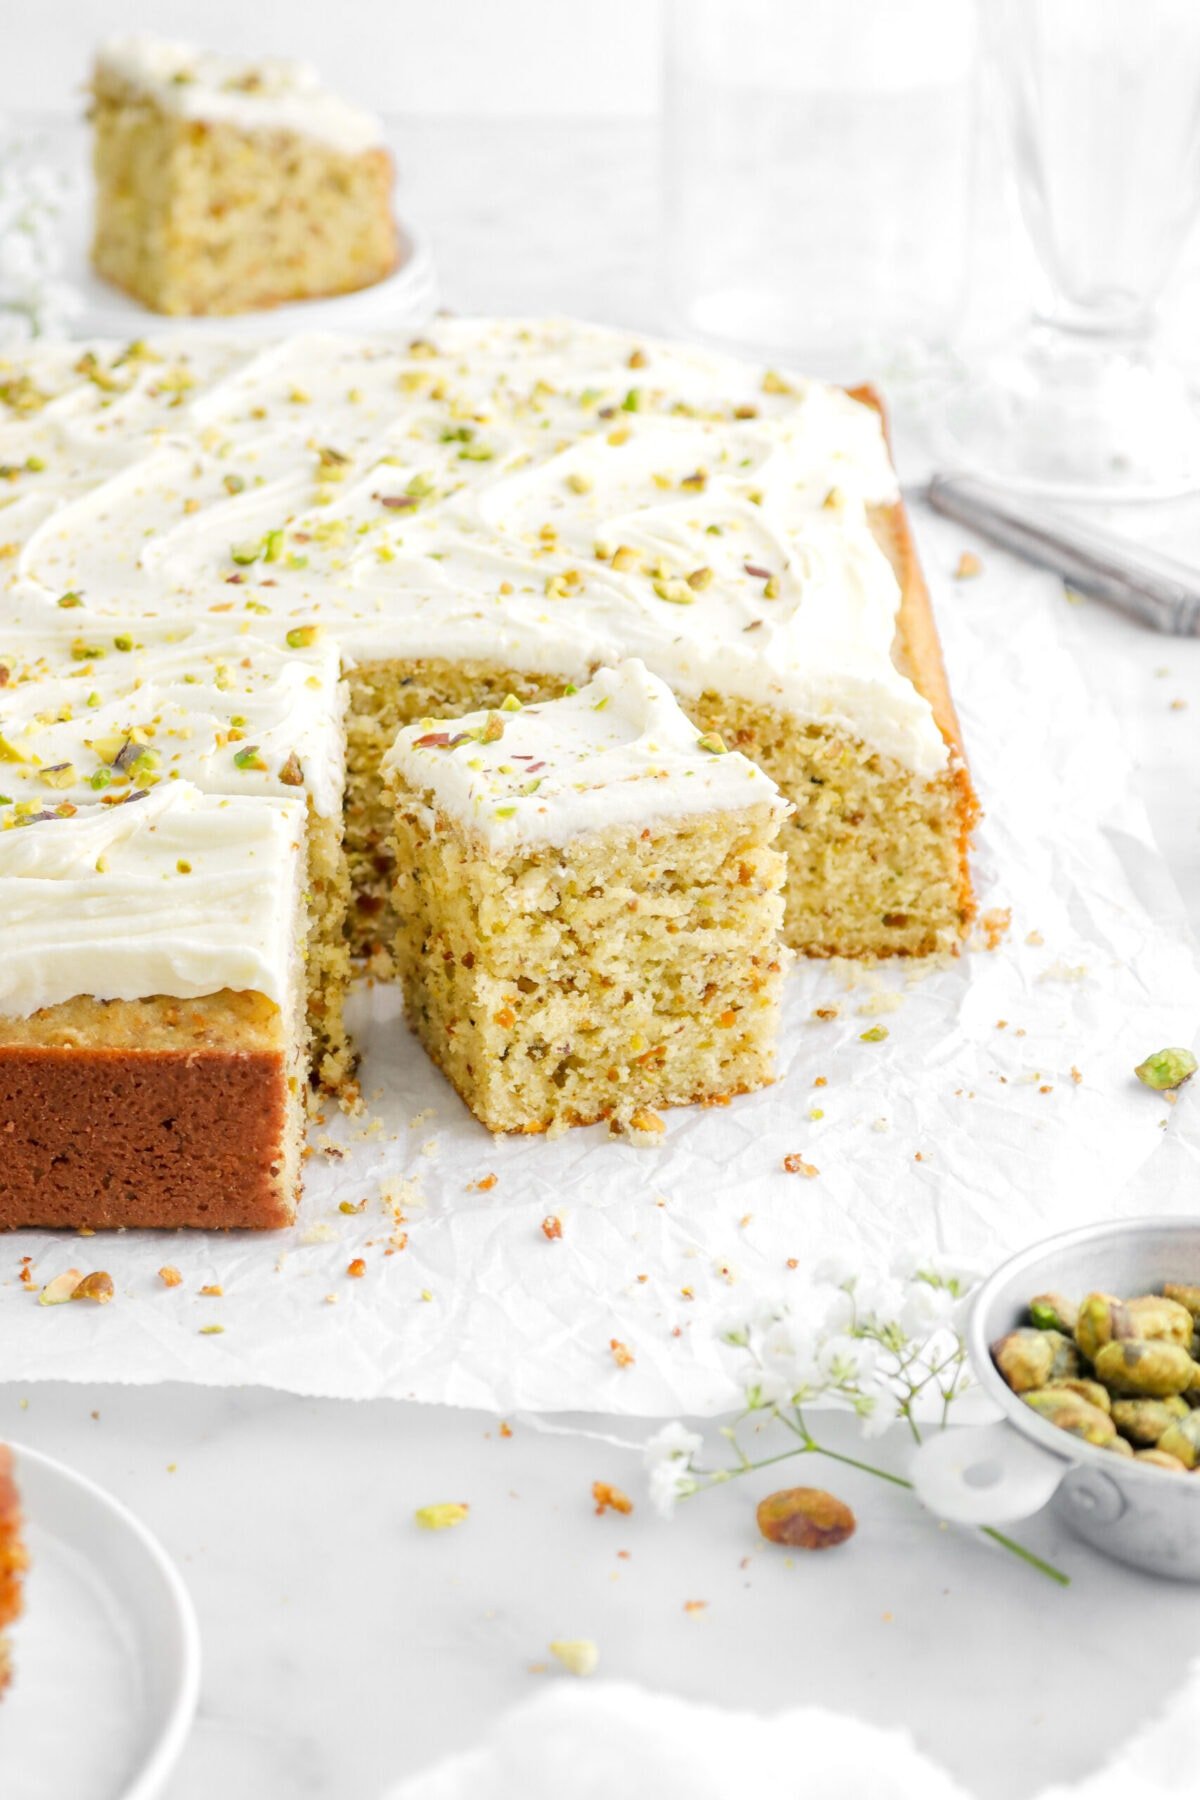 Pistachio Sheet Cake with White Chocolate Buttercream Frosting